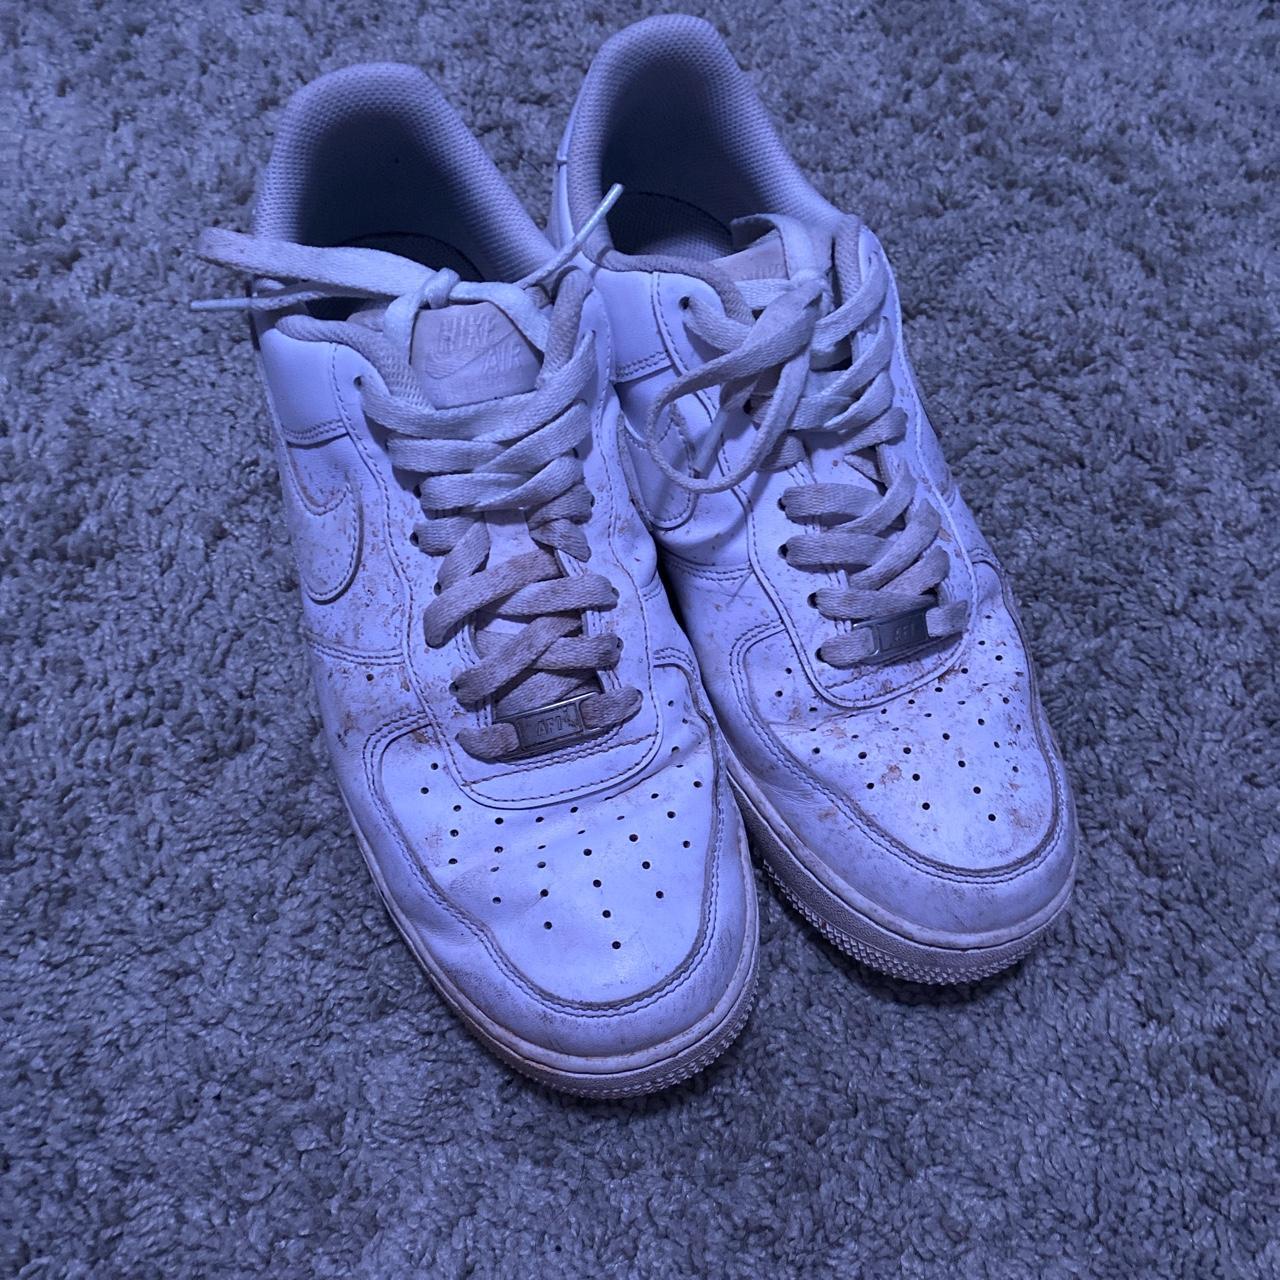 Dirty Air Force 1s Can be cleaned - Depop